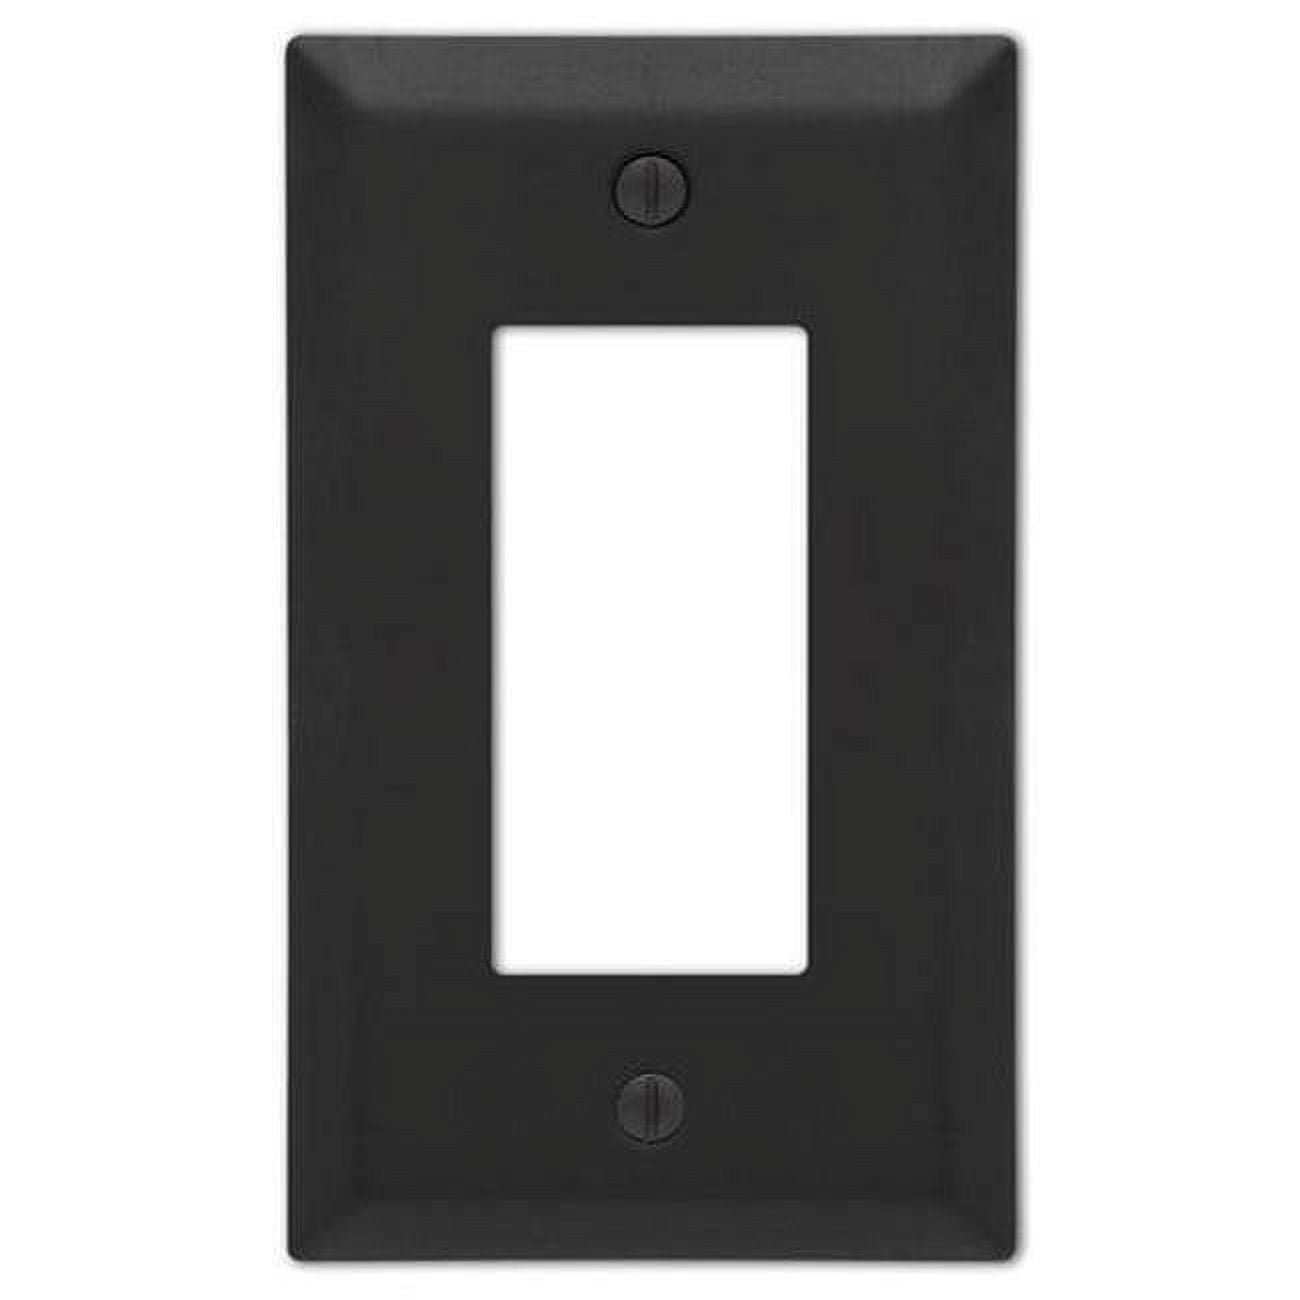 Picture of Amerelle 3008805 Century Stamped Steel Rocker Wall Plate - Matte Black